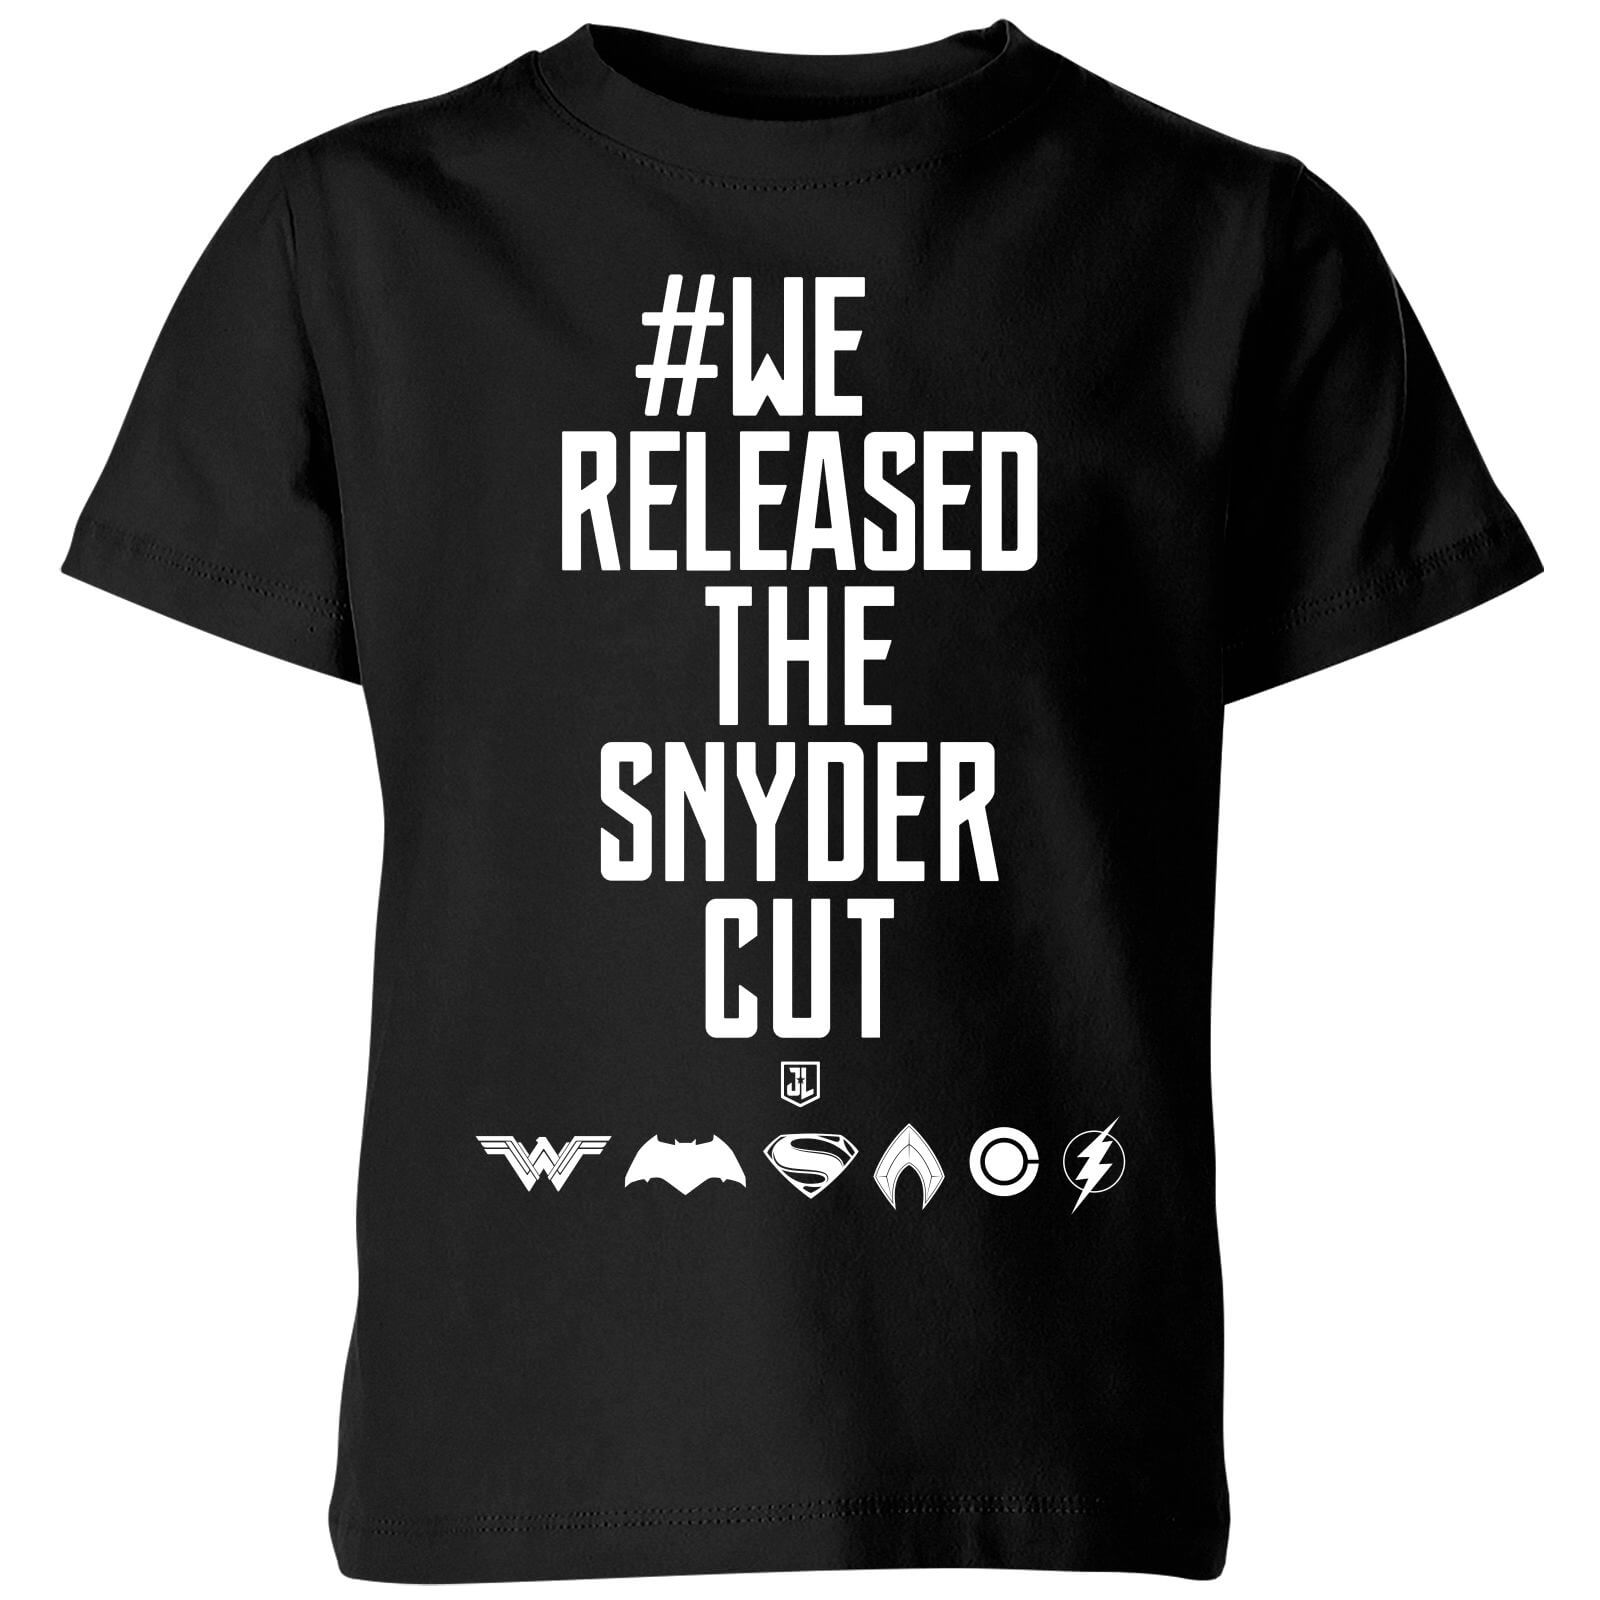 Justice League We Released The Snyder Cut Kids' T-Shirt - Black - 3-4 Years - Black